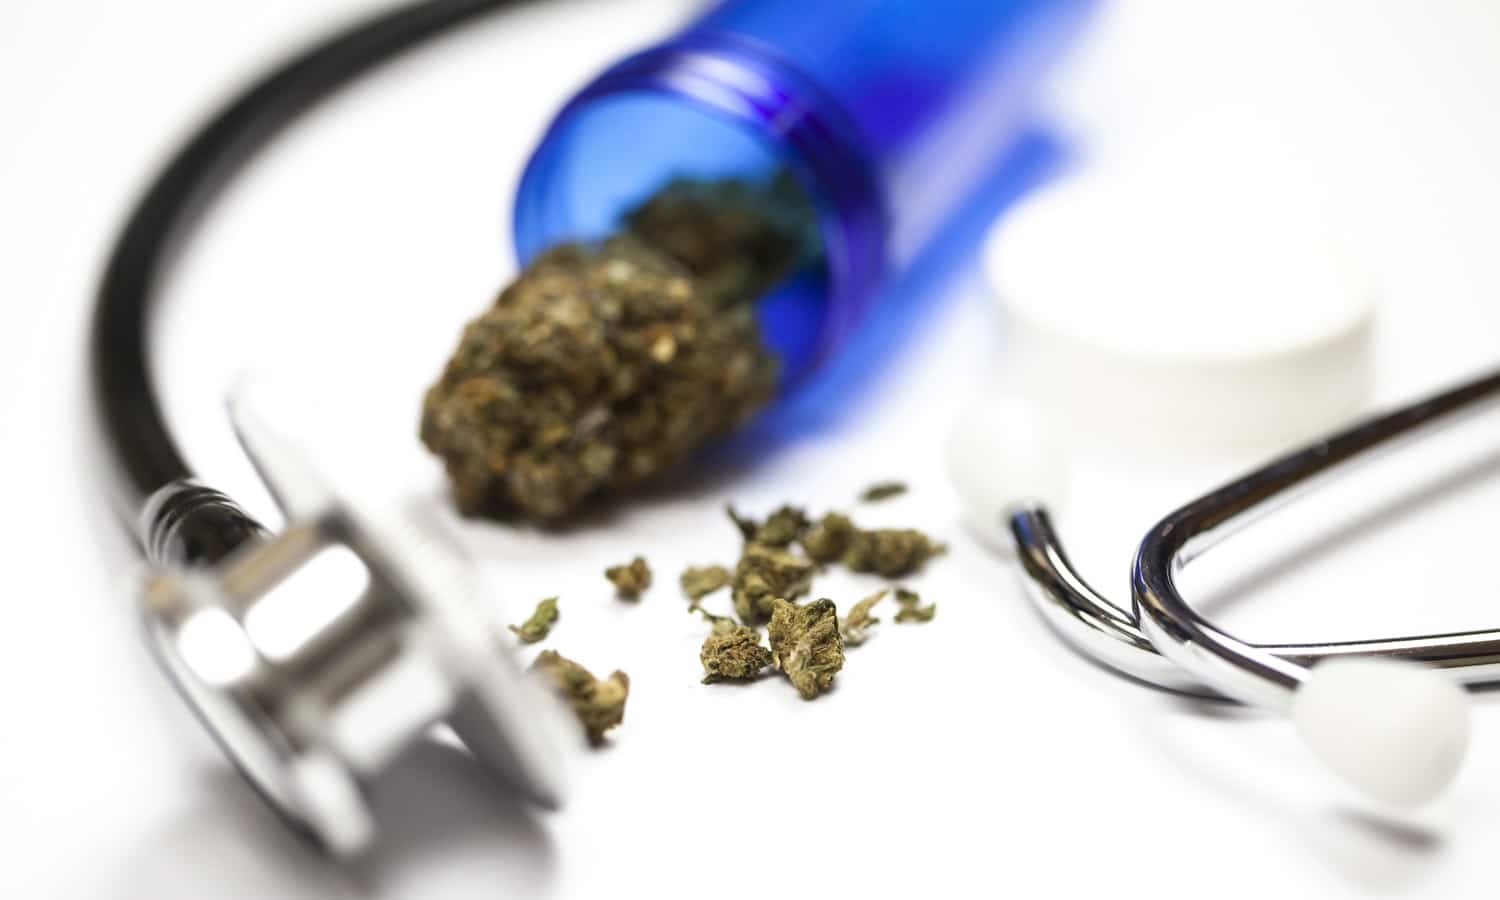 Lack Of Access To Medical Marijuana And CBD Is Cause For Concern